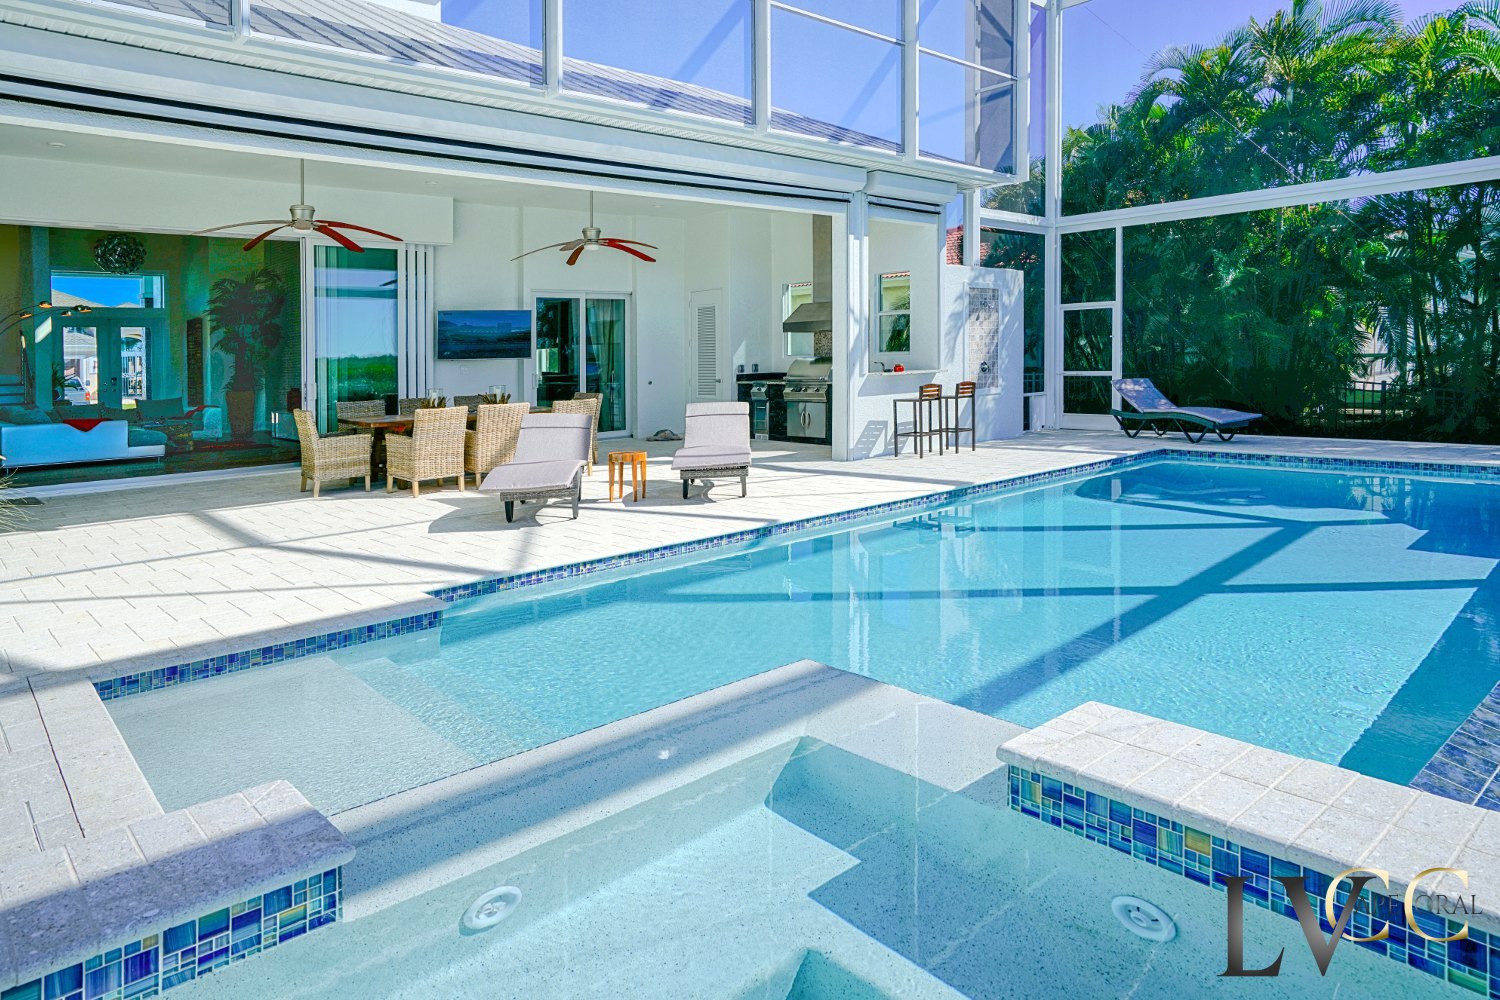 Pool area in the rental home